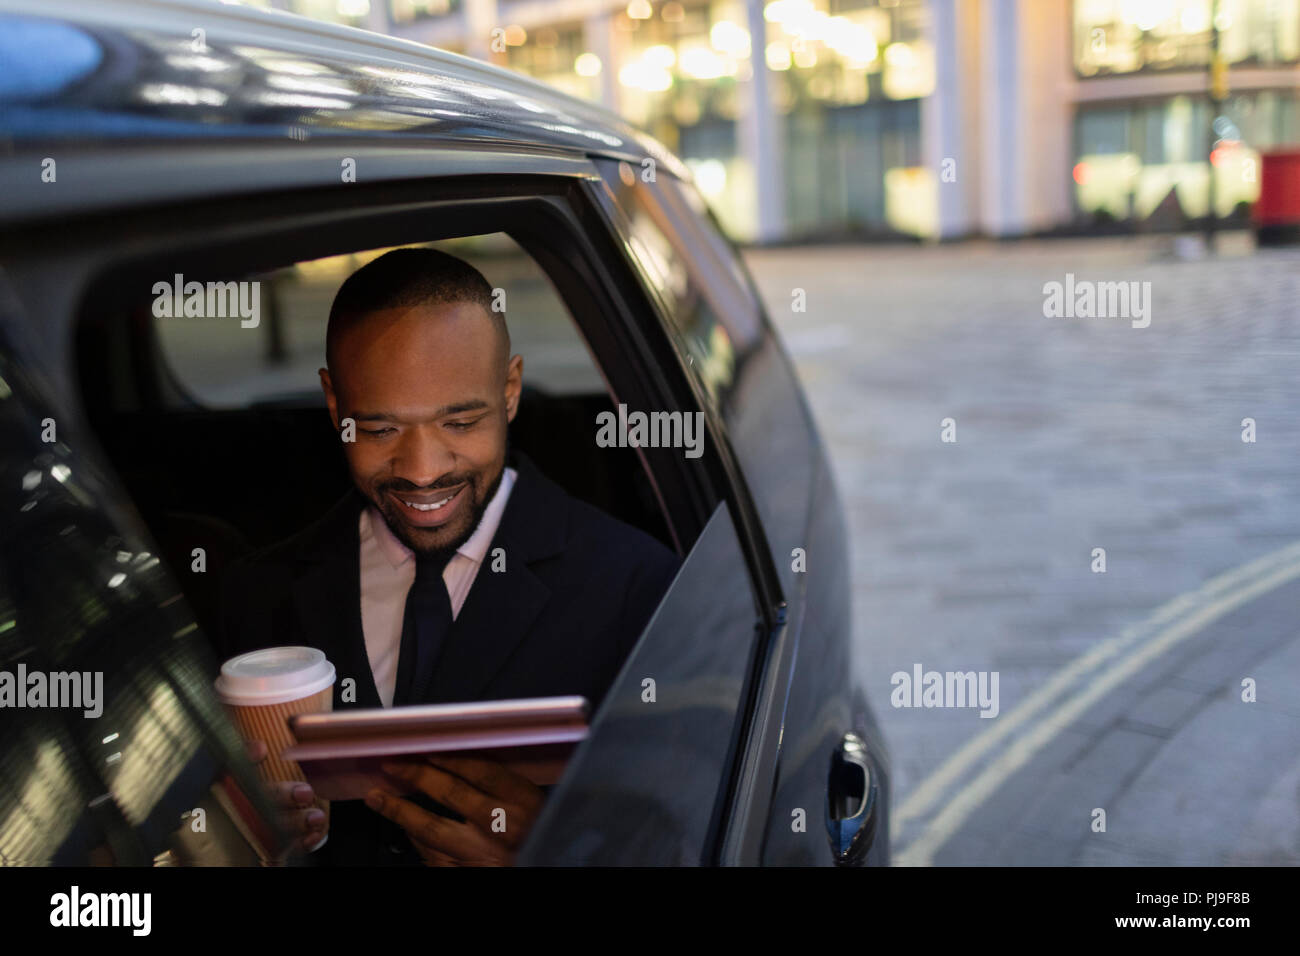 Businessman drinking coffee and using digital tablet in crowdsourced taxi Stock Photo